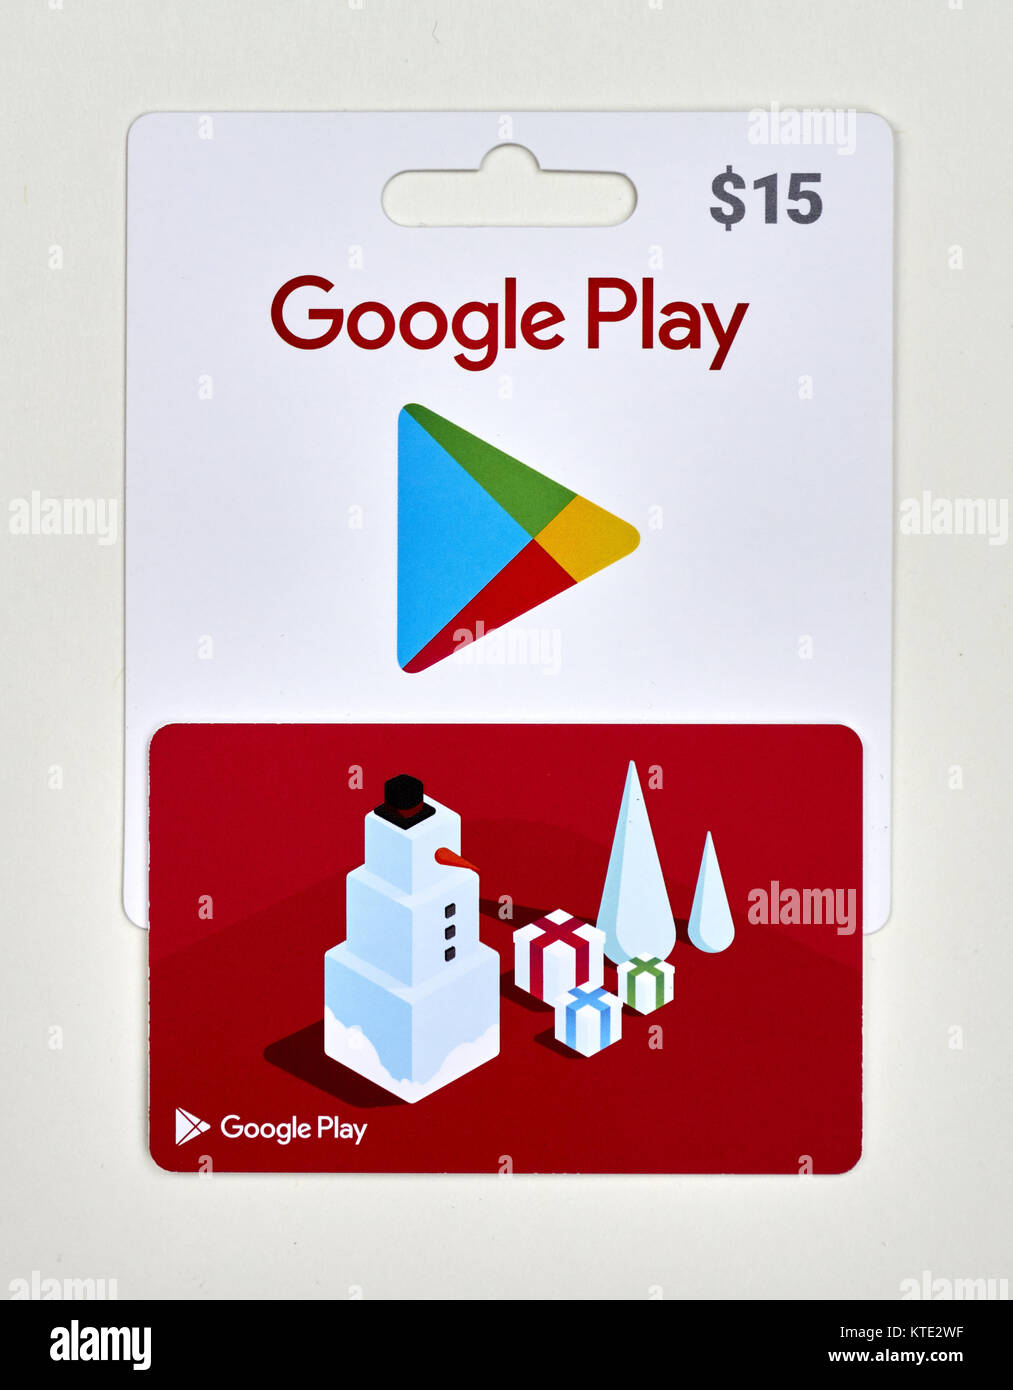 16 Play Games For  Gift Cards Images, Stock Photos, 3D